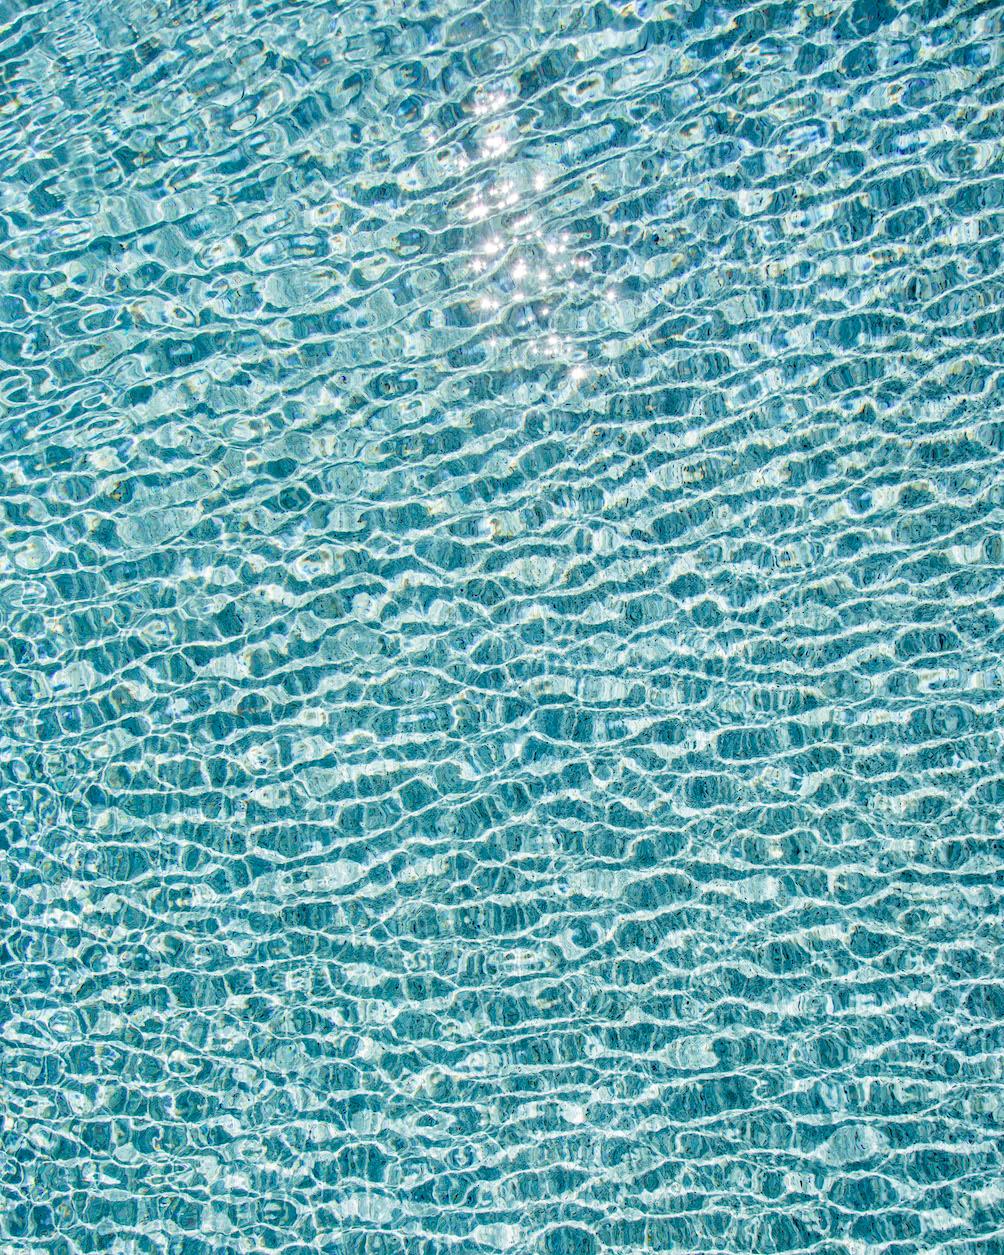 H2O V - large format photograph of sun reflections on pool water surface